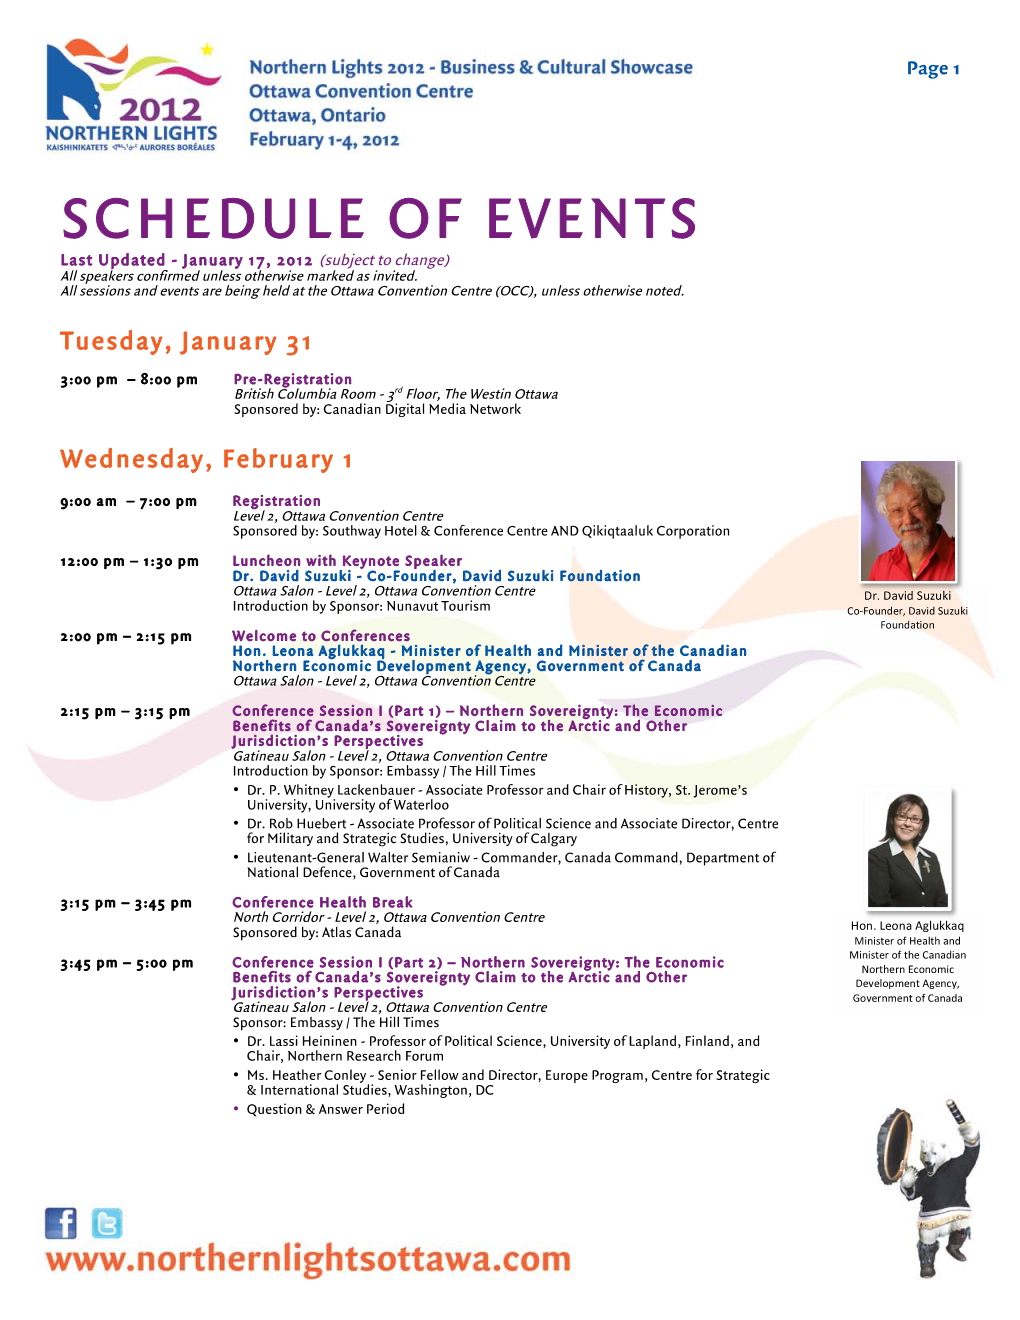 SCHEDULE of EVENTS Last Updated - January 17, 2012 (Subject to Change) All Speakers Confirmed Unless Otherwise Marked As Invited